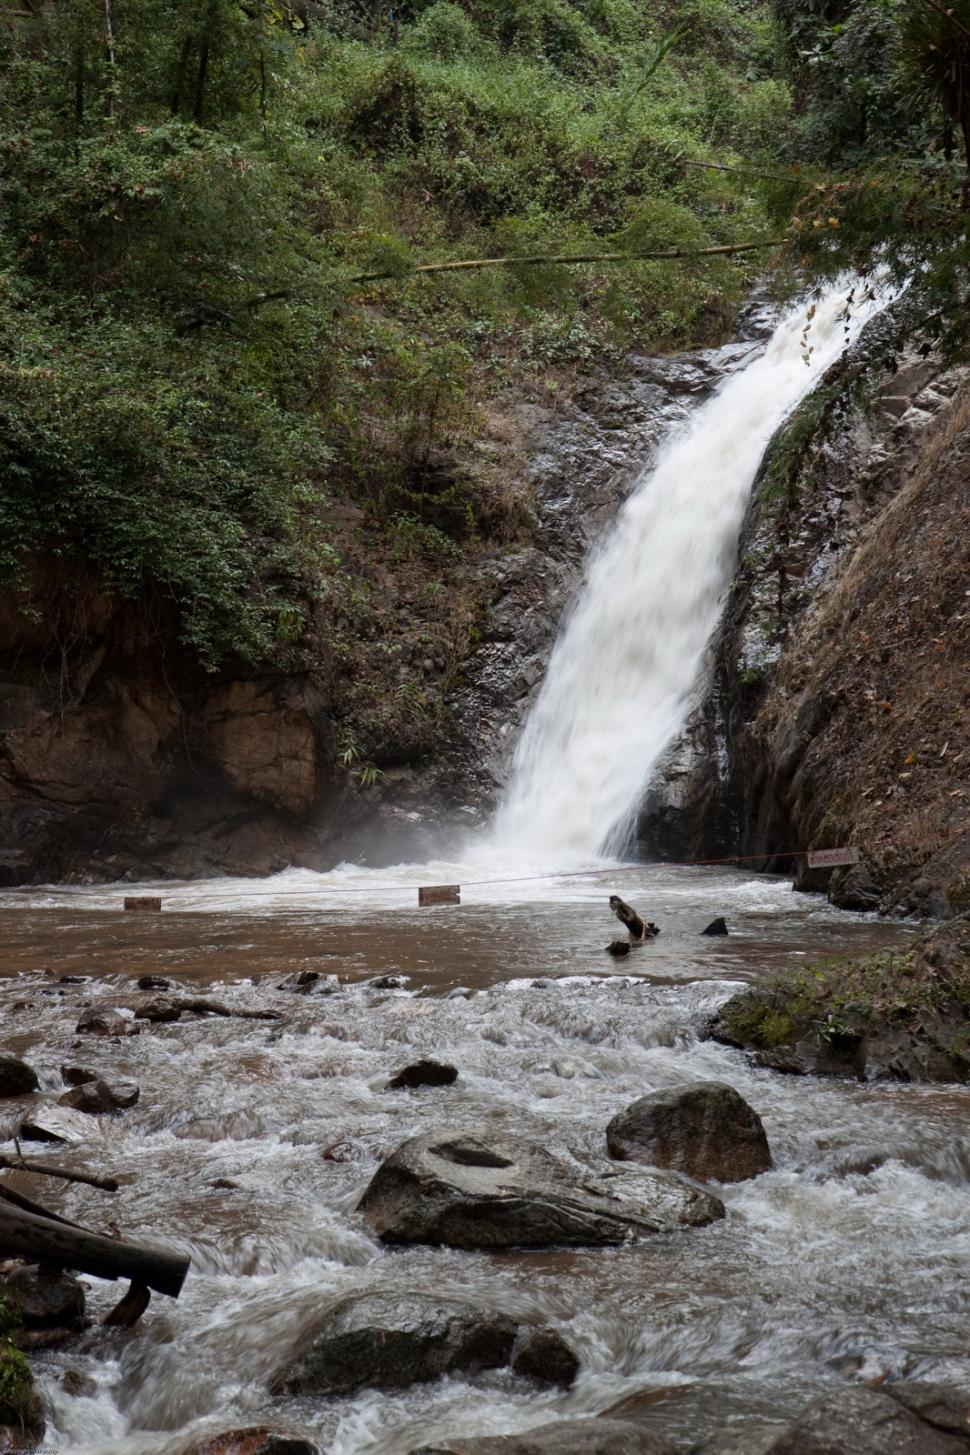 Free Image of Man Standing in River Next to Waterfall 